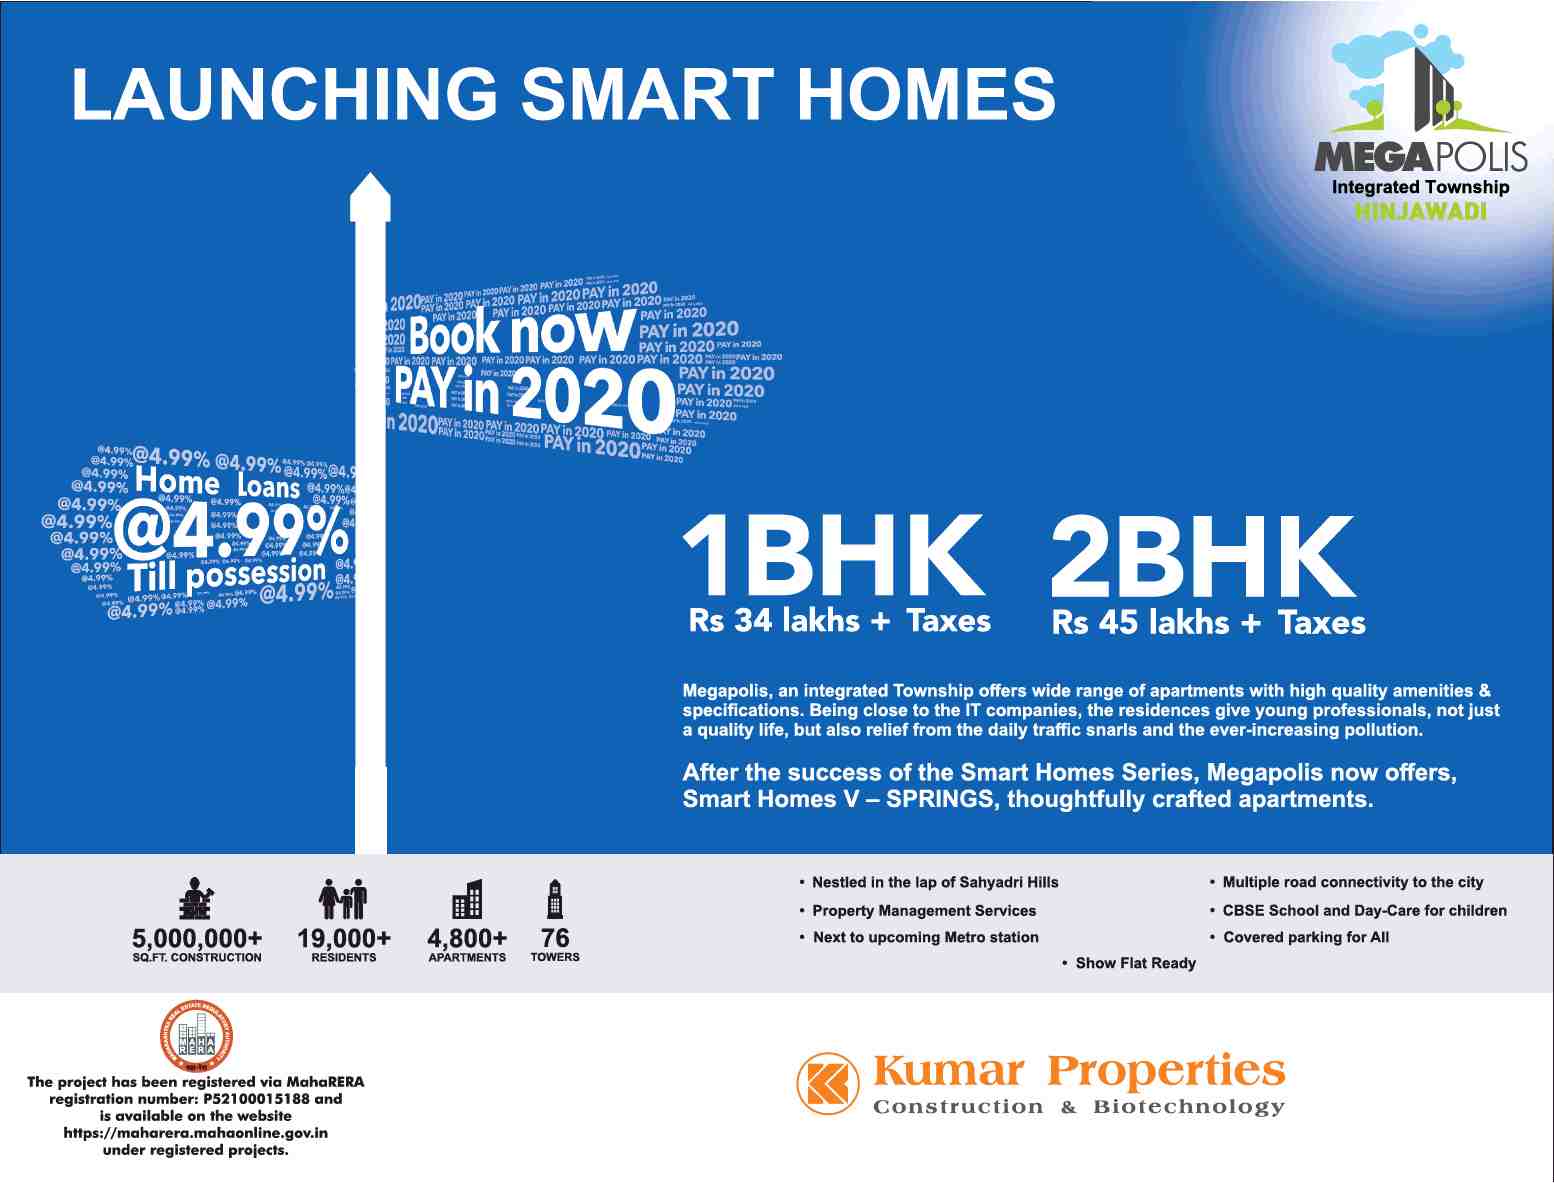 Book with home loans @ 4.99% till possession at Kumar Megapolis in Pune Update